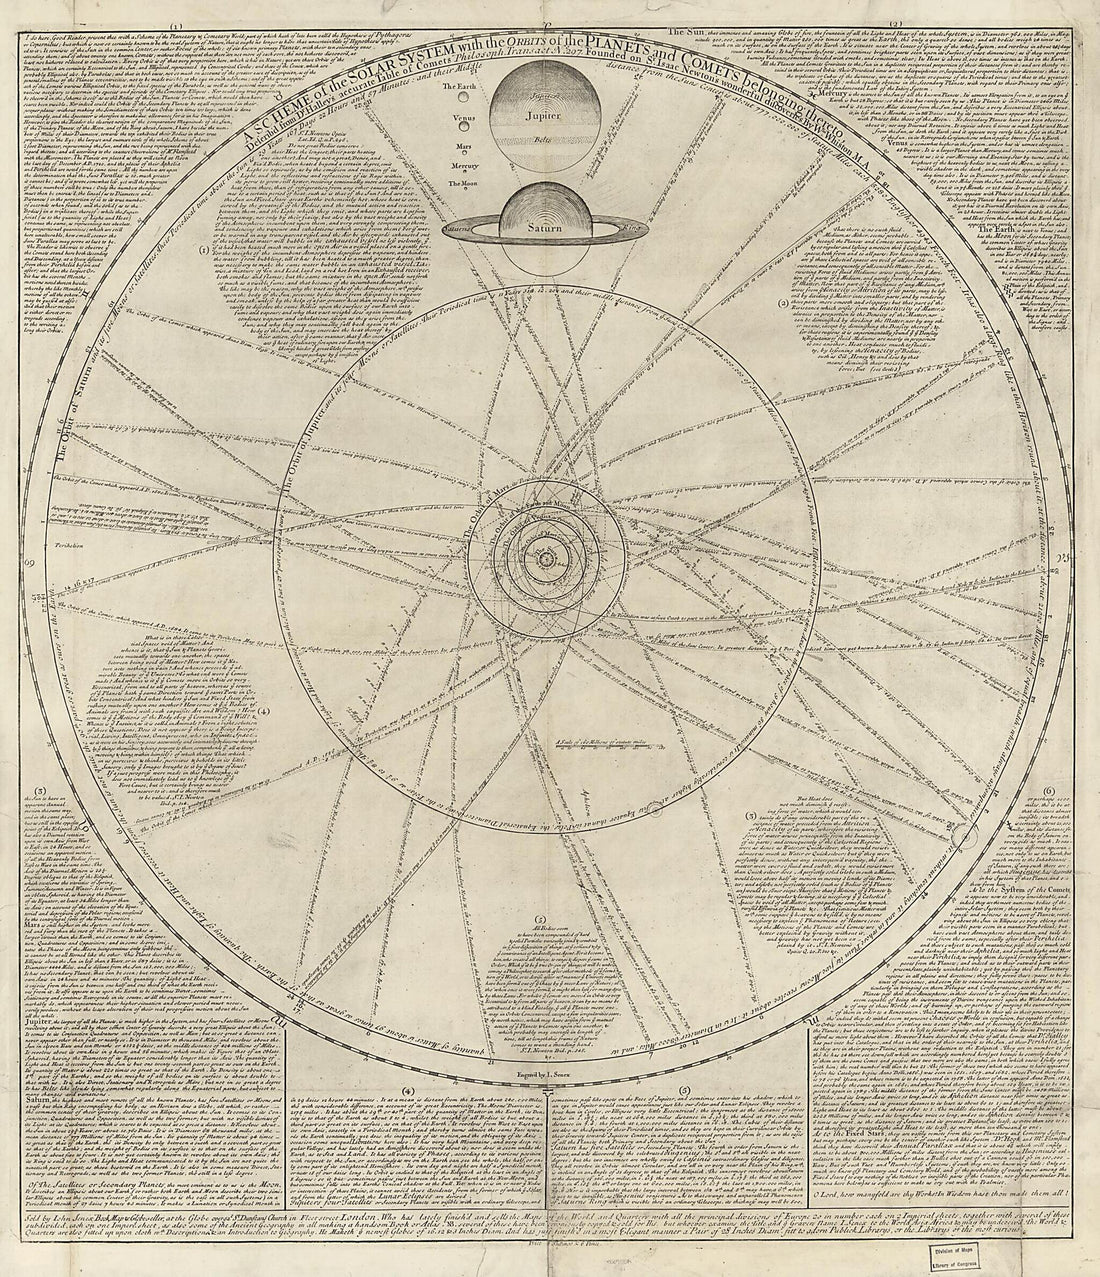 This old map of A Scheme of the Solar System With the Orbits of the Planets and Comets Belonging Thereto from 1720 was created by John Senex, William Whiston in 1720